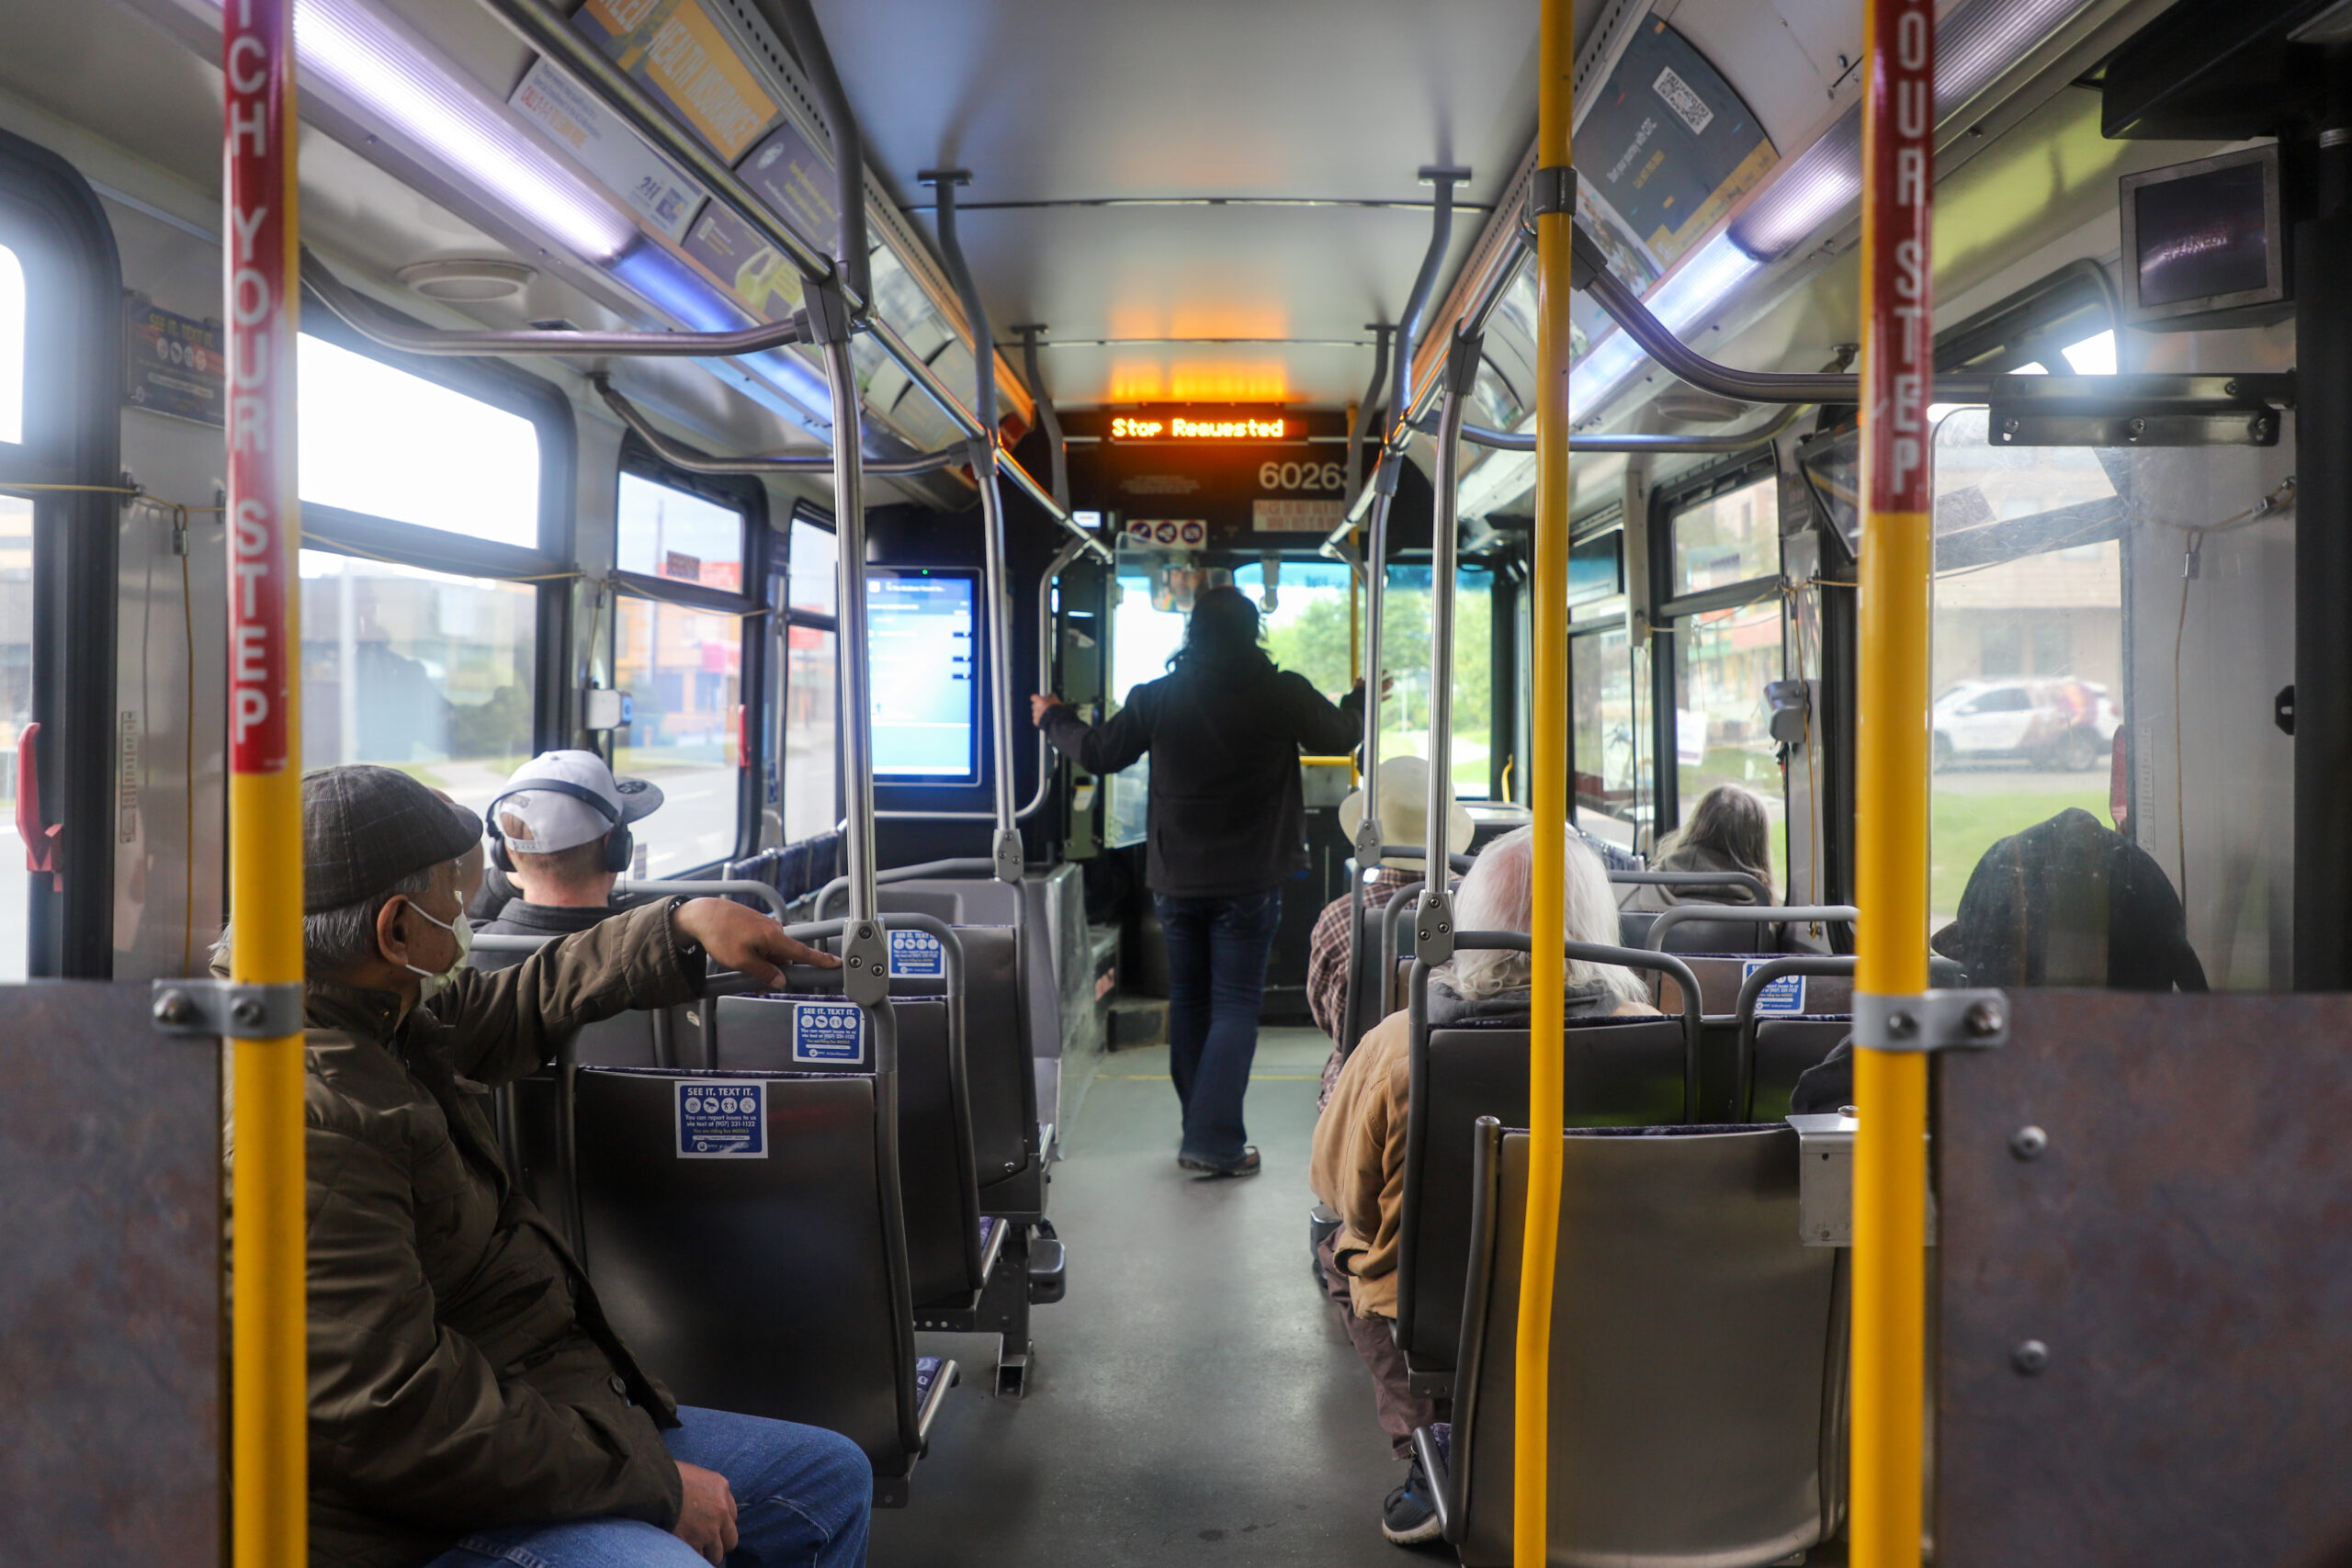 The inside of a bus. One passenger stands in the middle, walking to the front door. People sit on either side.